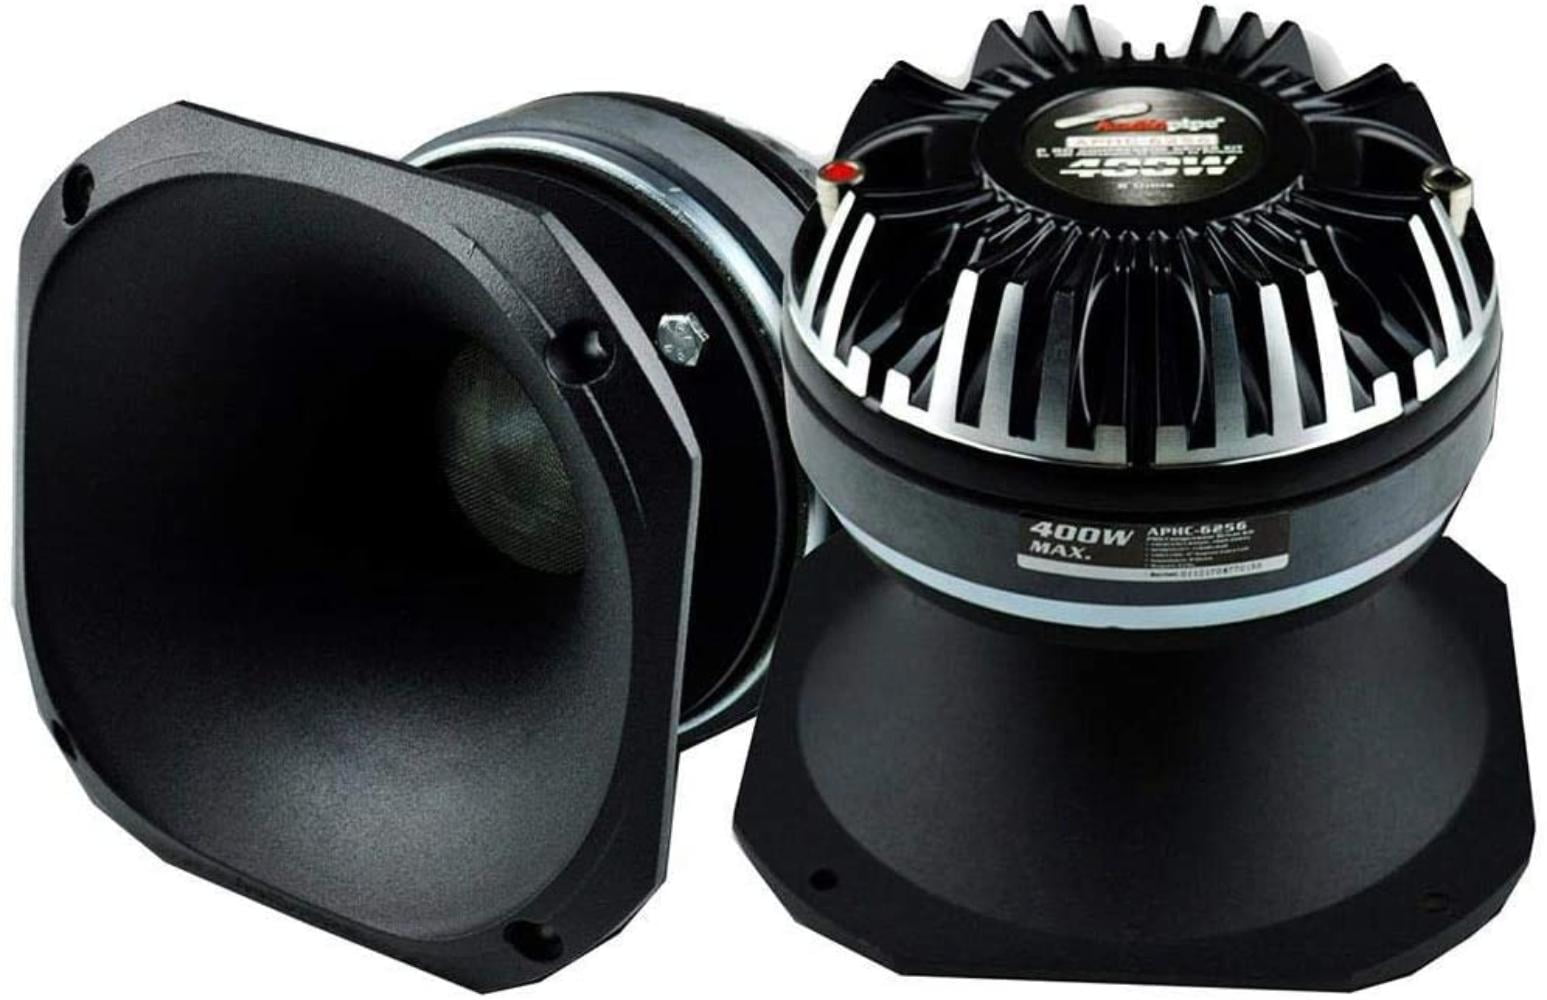 AudioPipe APHC-4550 Car Audio Compression Driver with ABS Horn Combo for High Frequency Vehicle Stereo or Radio Listening 3.5 Inch 